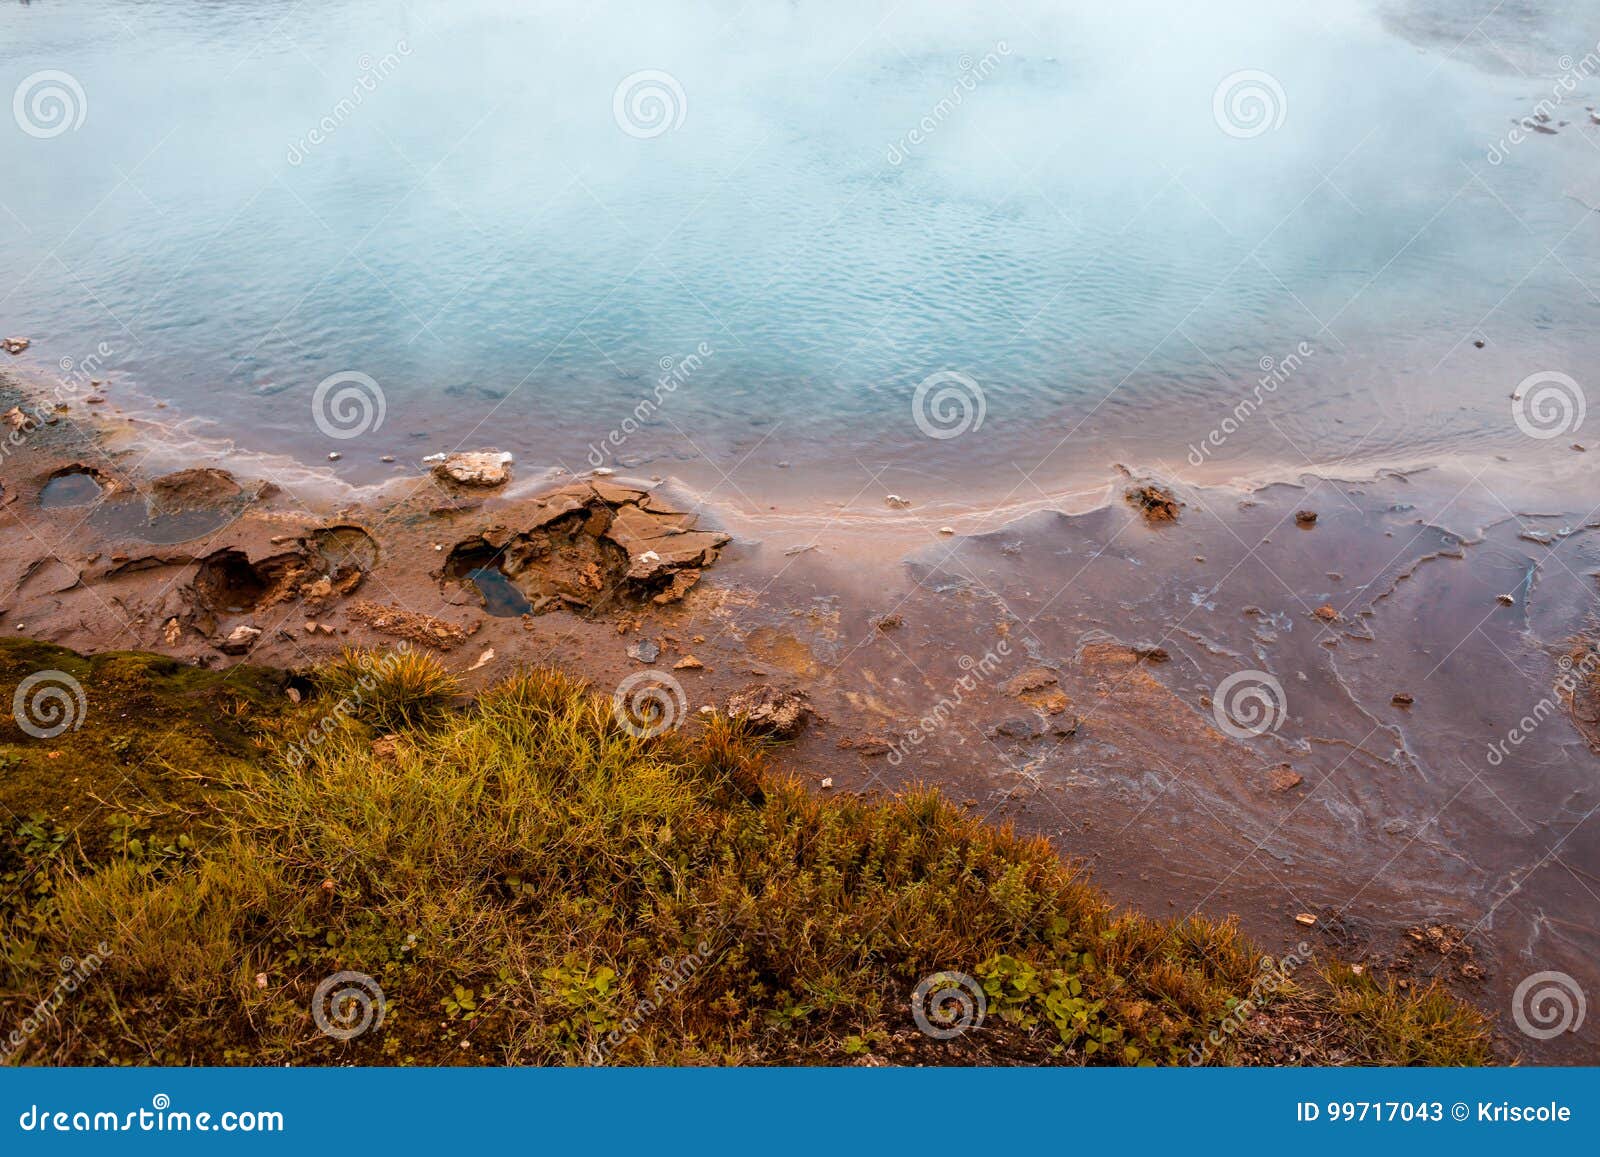 Geothermal Hot Springs Are Naturally Occurring Geological